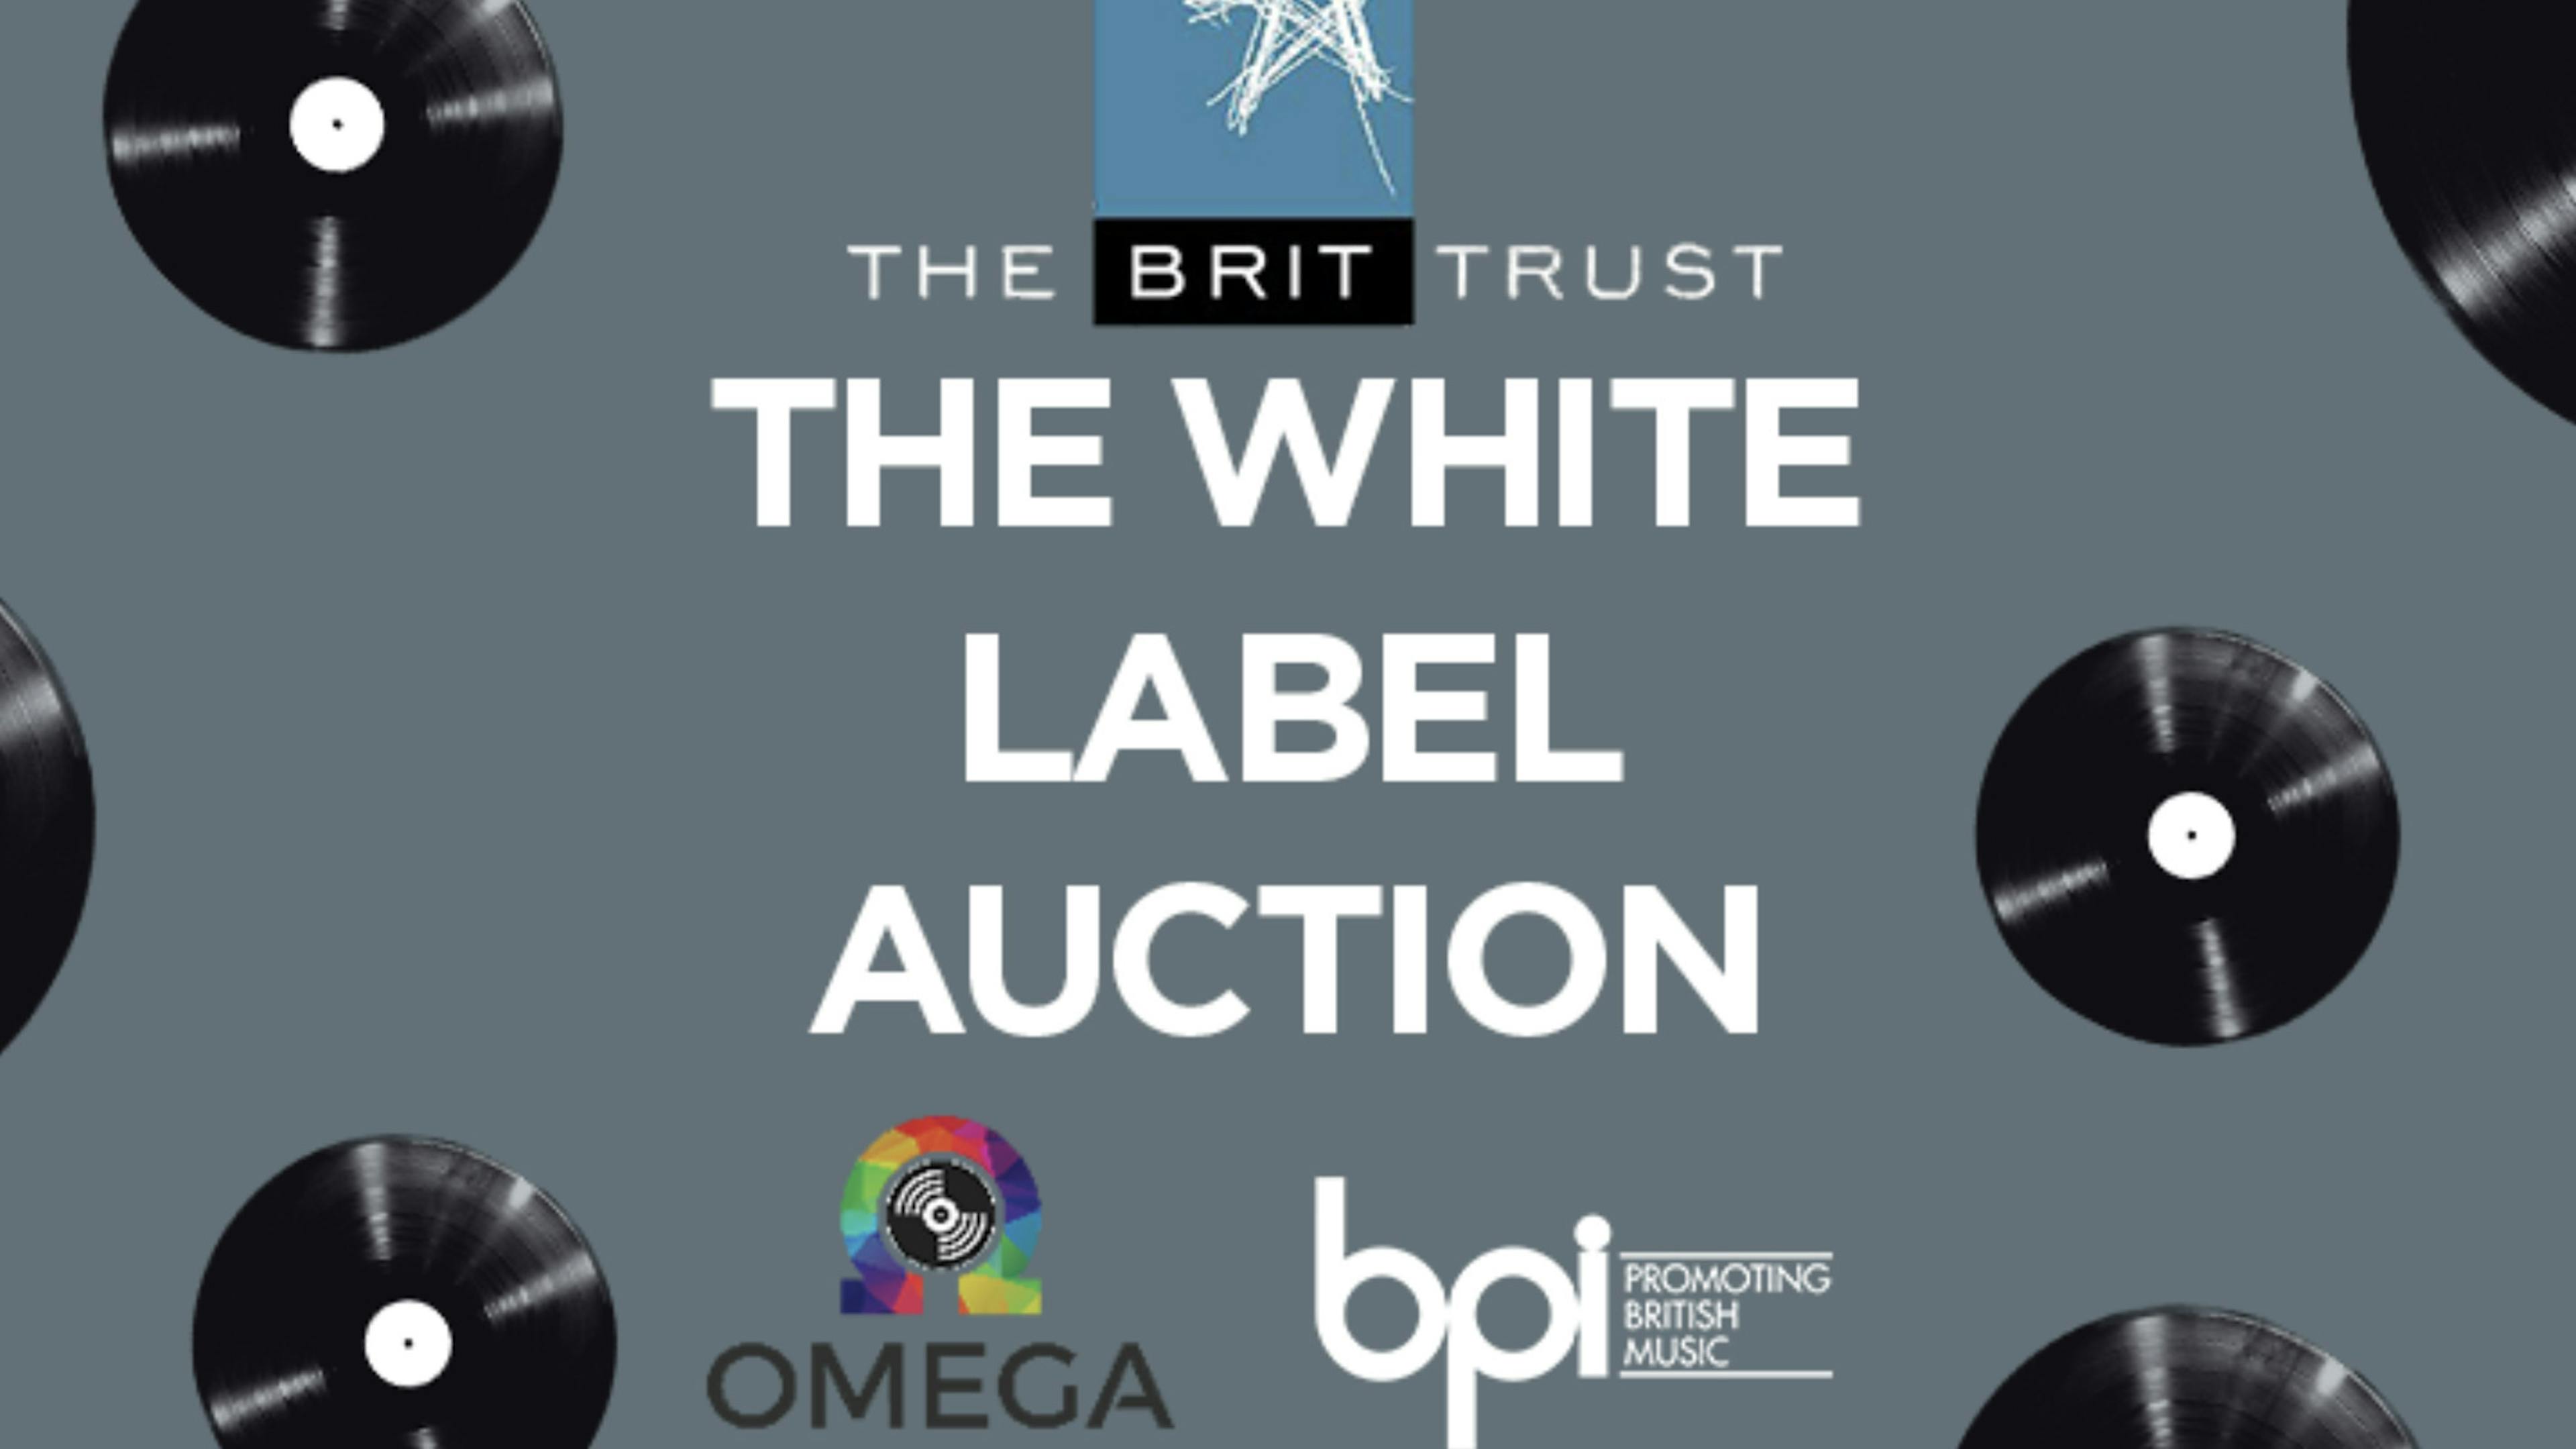 Beastie Boys, KISS, The Cure and more donate vinyl test pressings for BRIT Trust auction